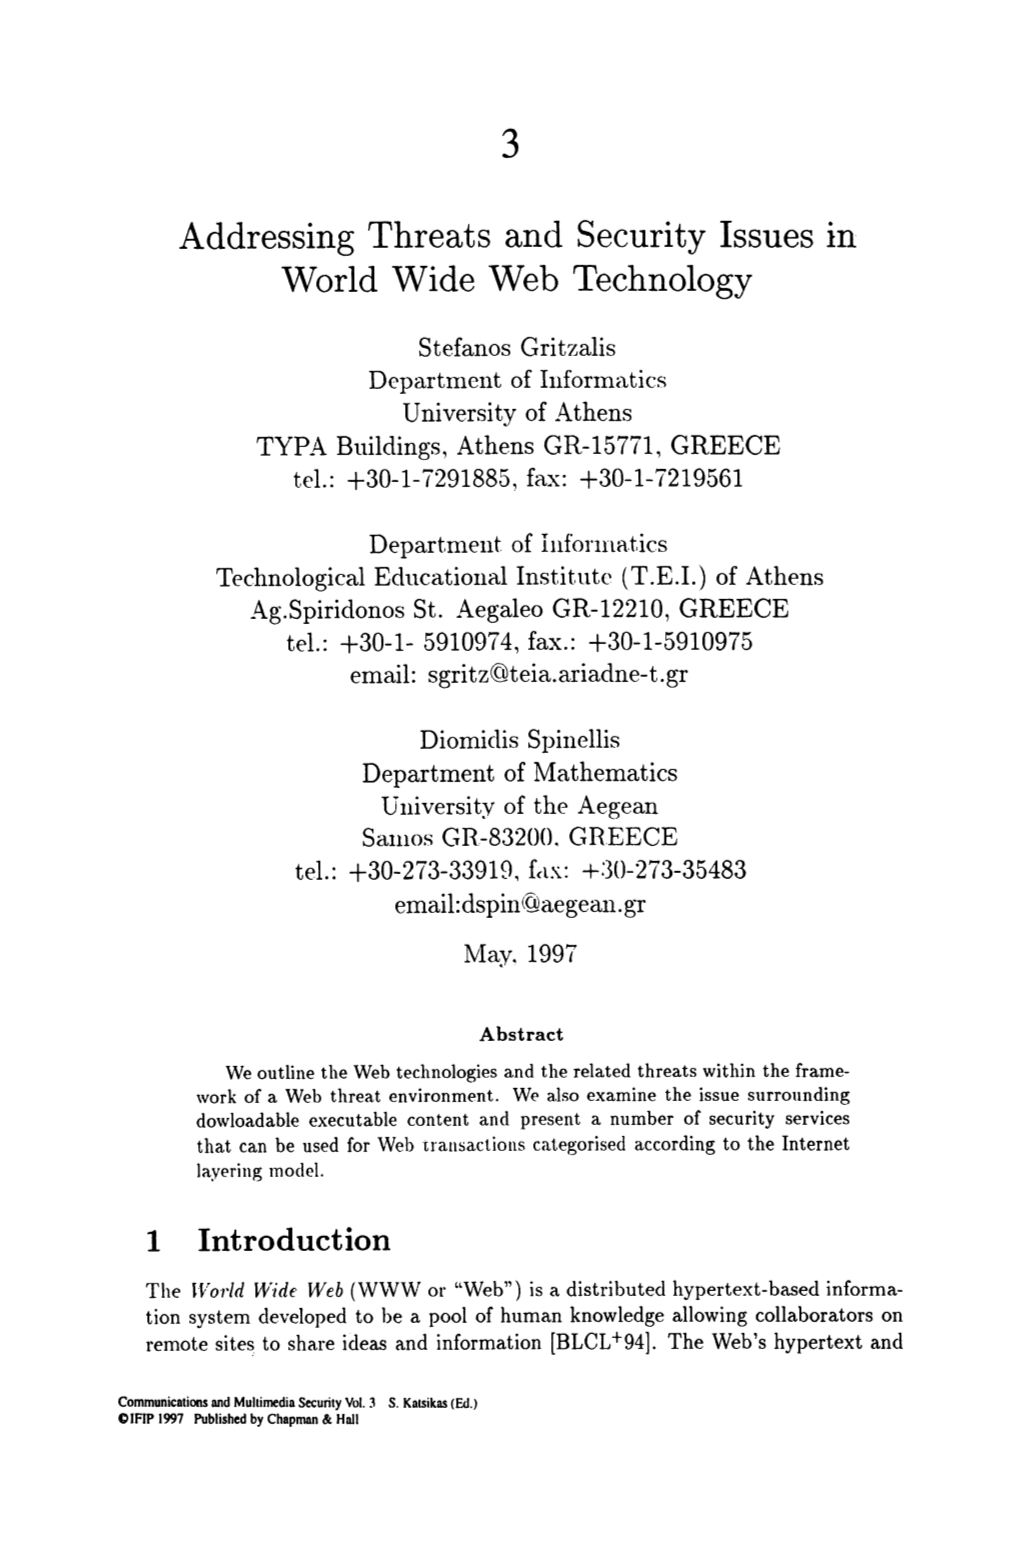 Addressing Threats and Security Issues in World Wide Web Technology